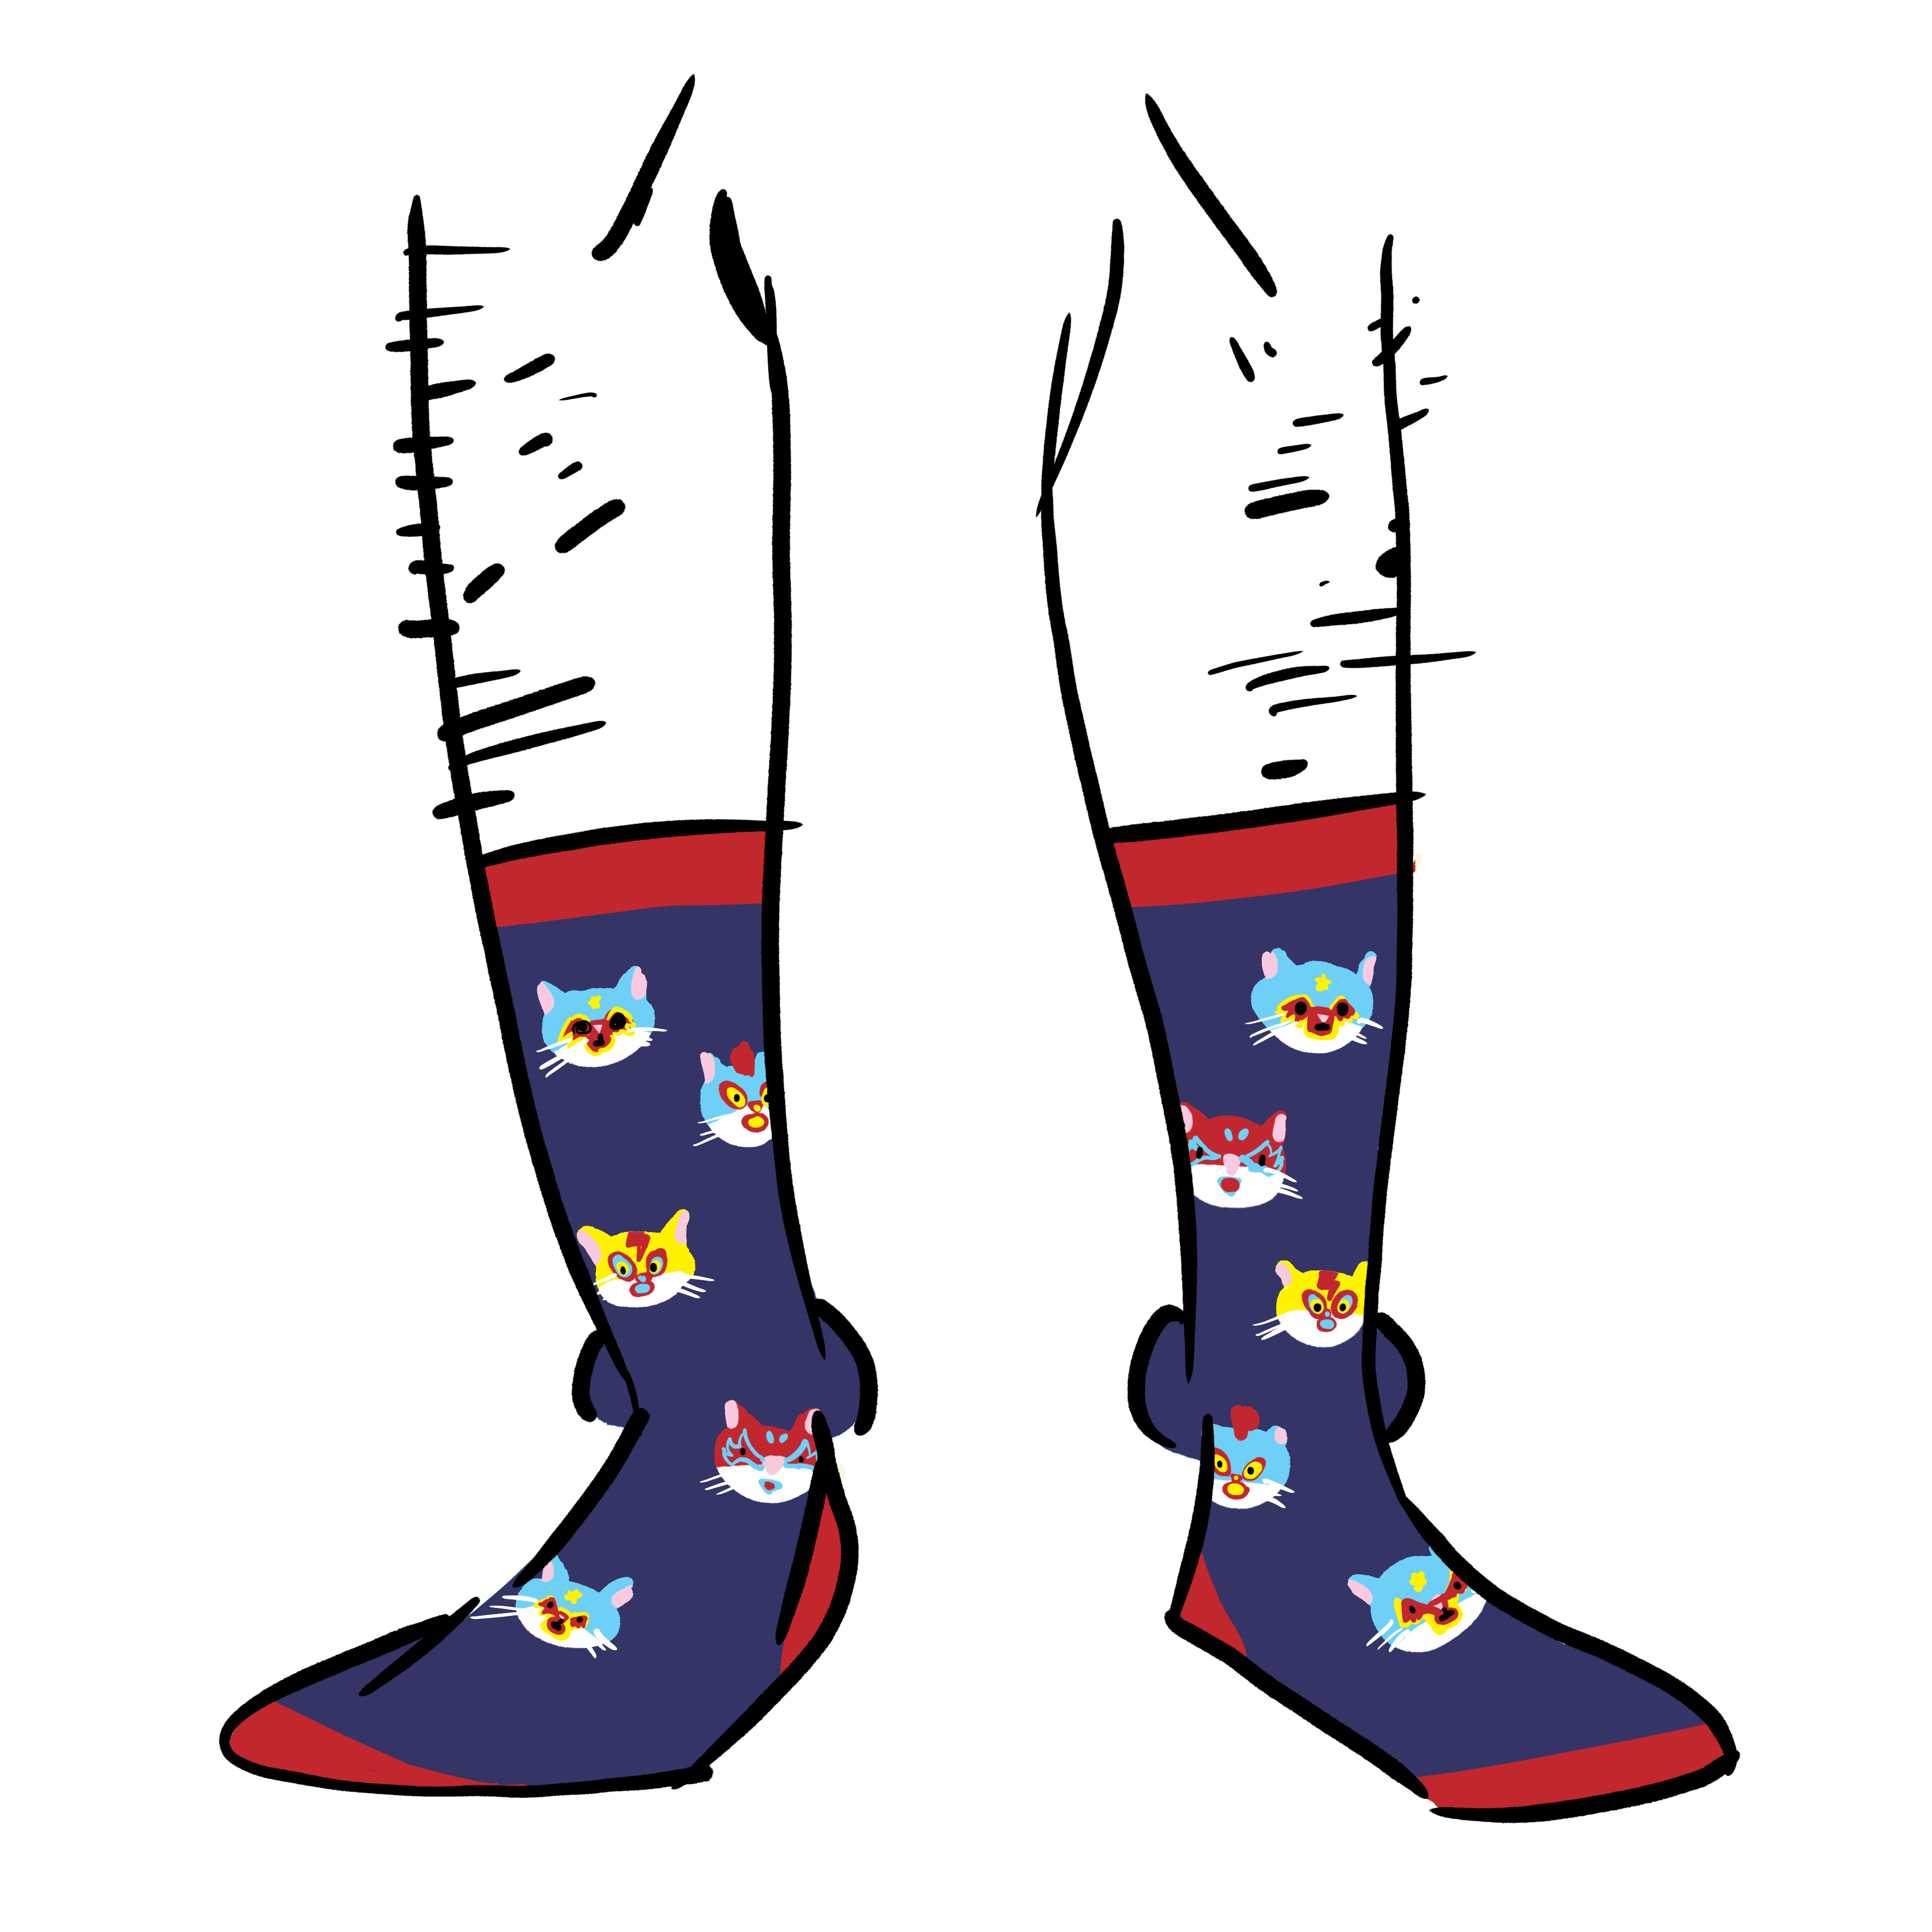 Blue socks with the faces of cats as a pattern. The cats are wearing luchadore masks.